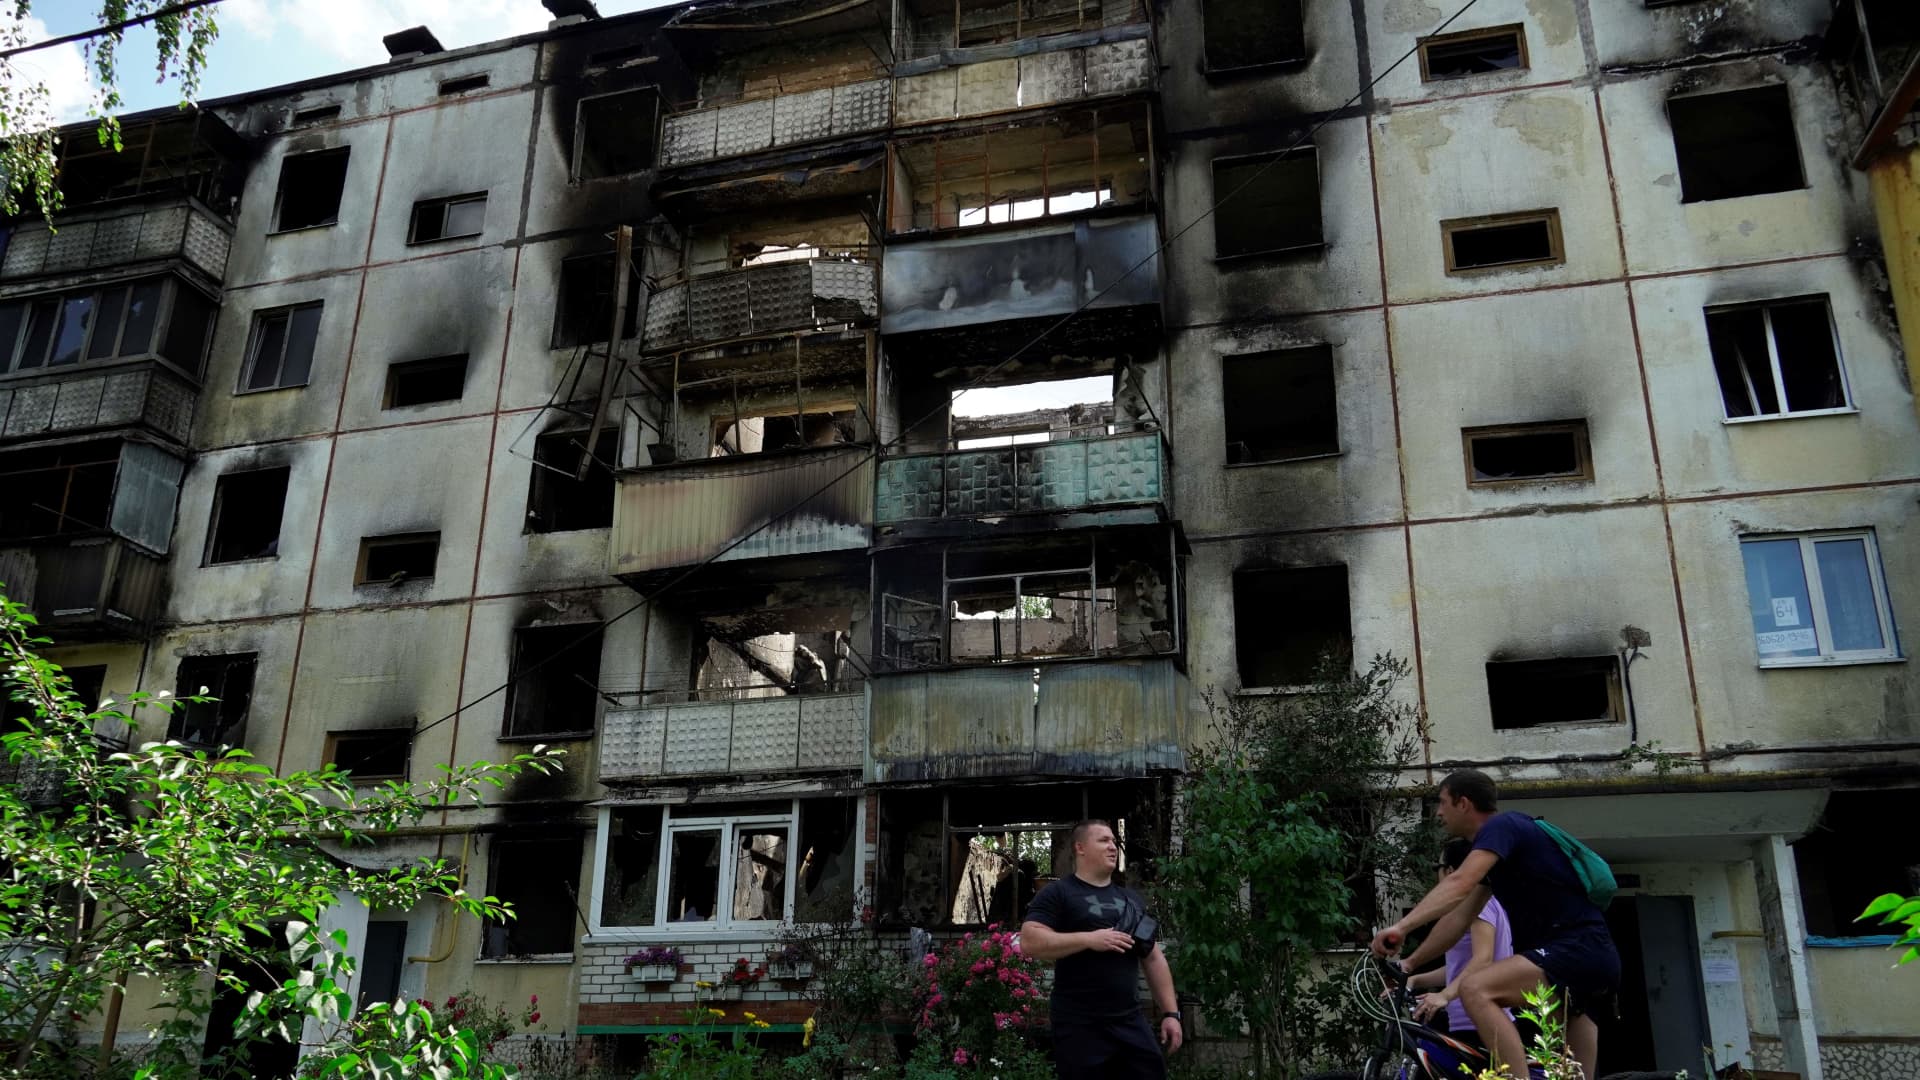 A building damaged by strikes in the town of Shebekino in Belgorod province, near the Ukrainian border, on July 2, 2023.